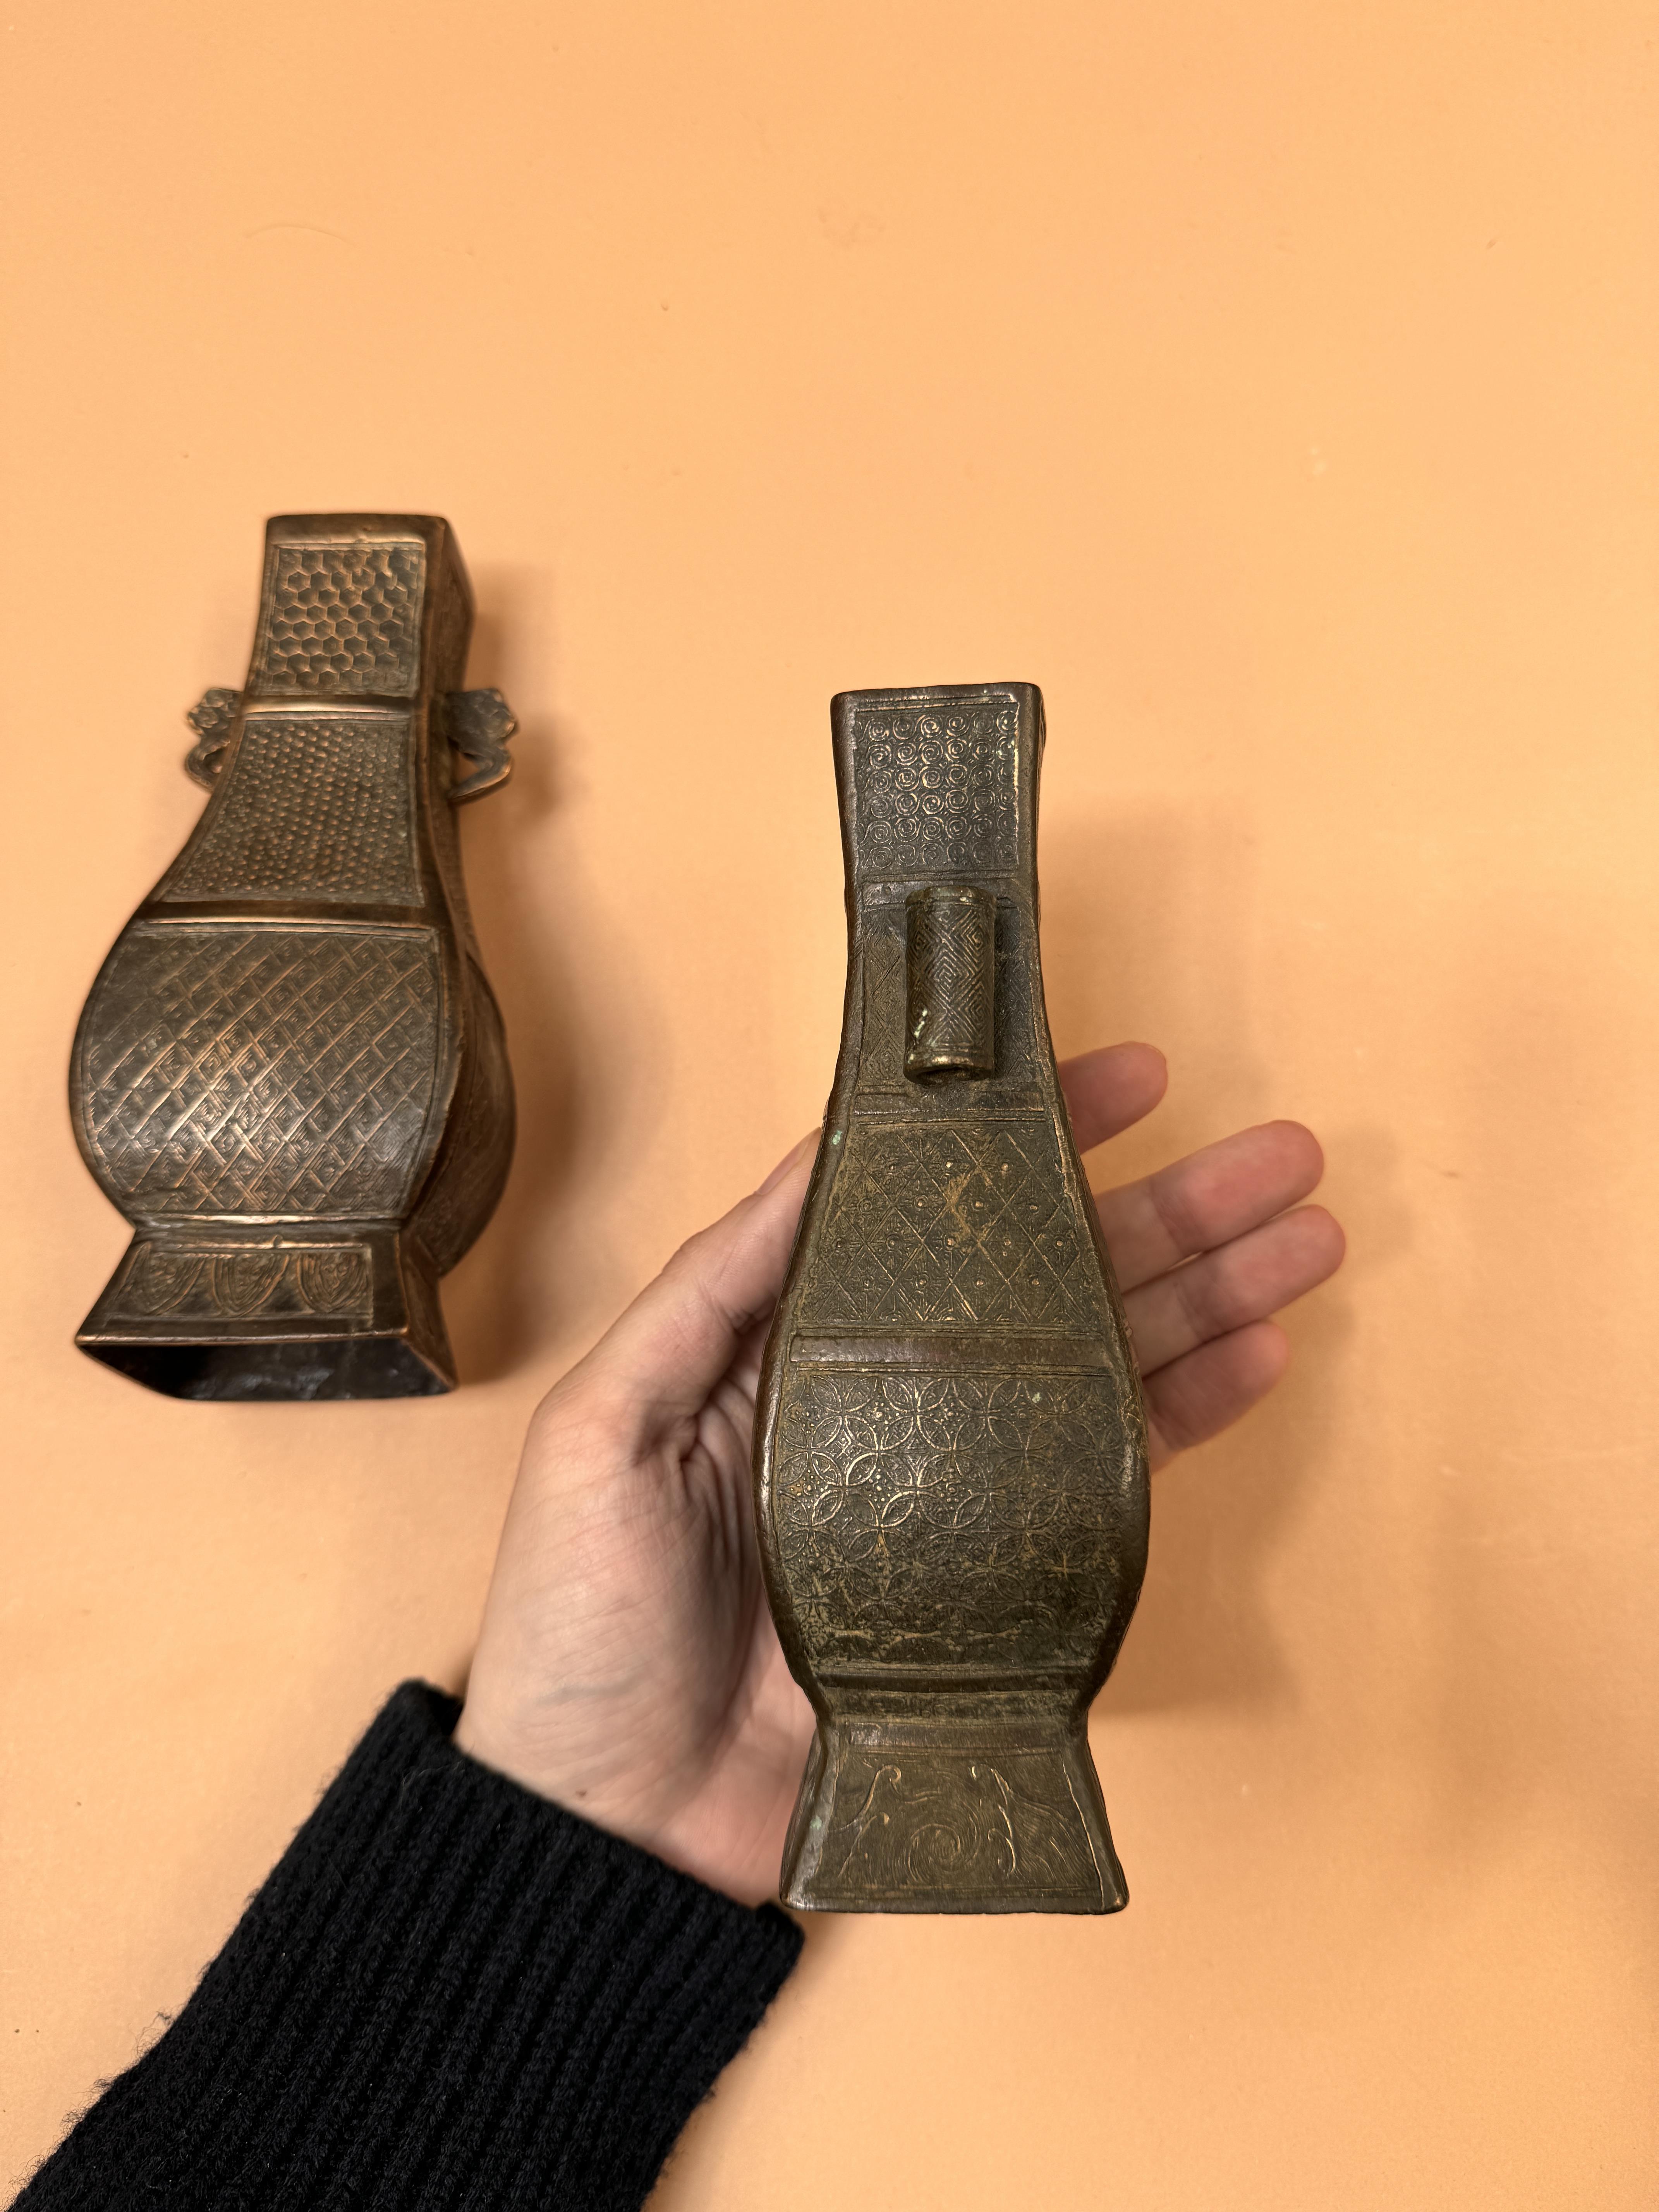 TWO SMALL CHINESE BRONZE ARCHAISTIC VASES 明 銅仿古方壺兩件 - Image 21 of 21